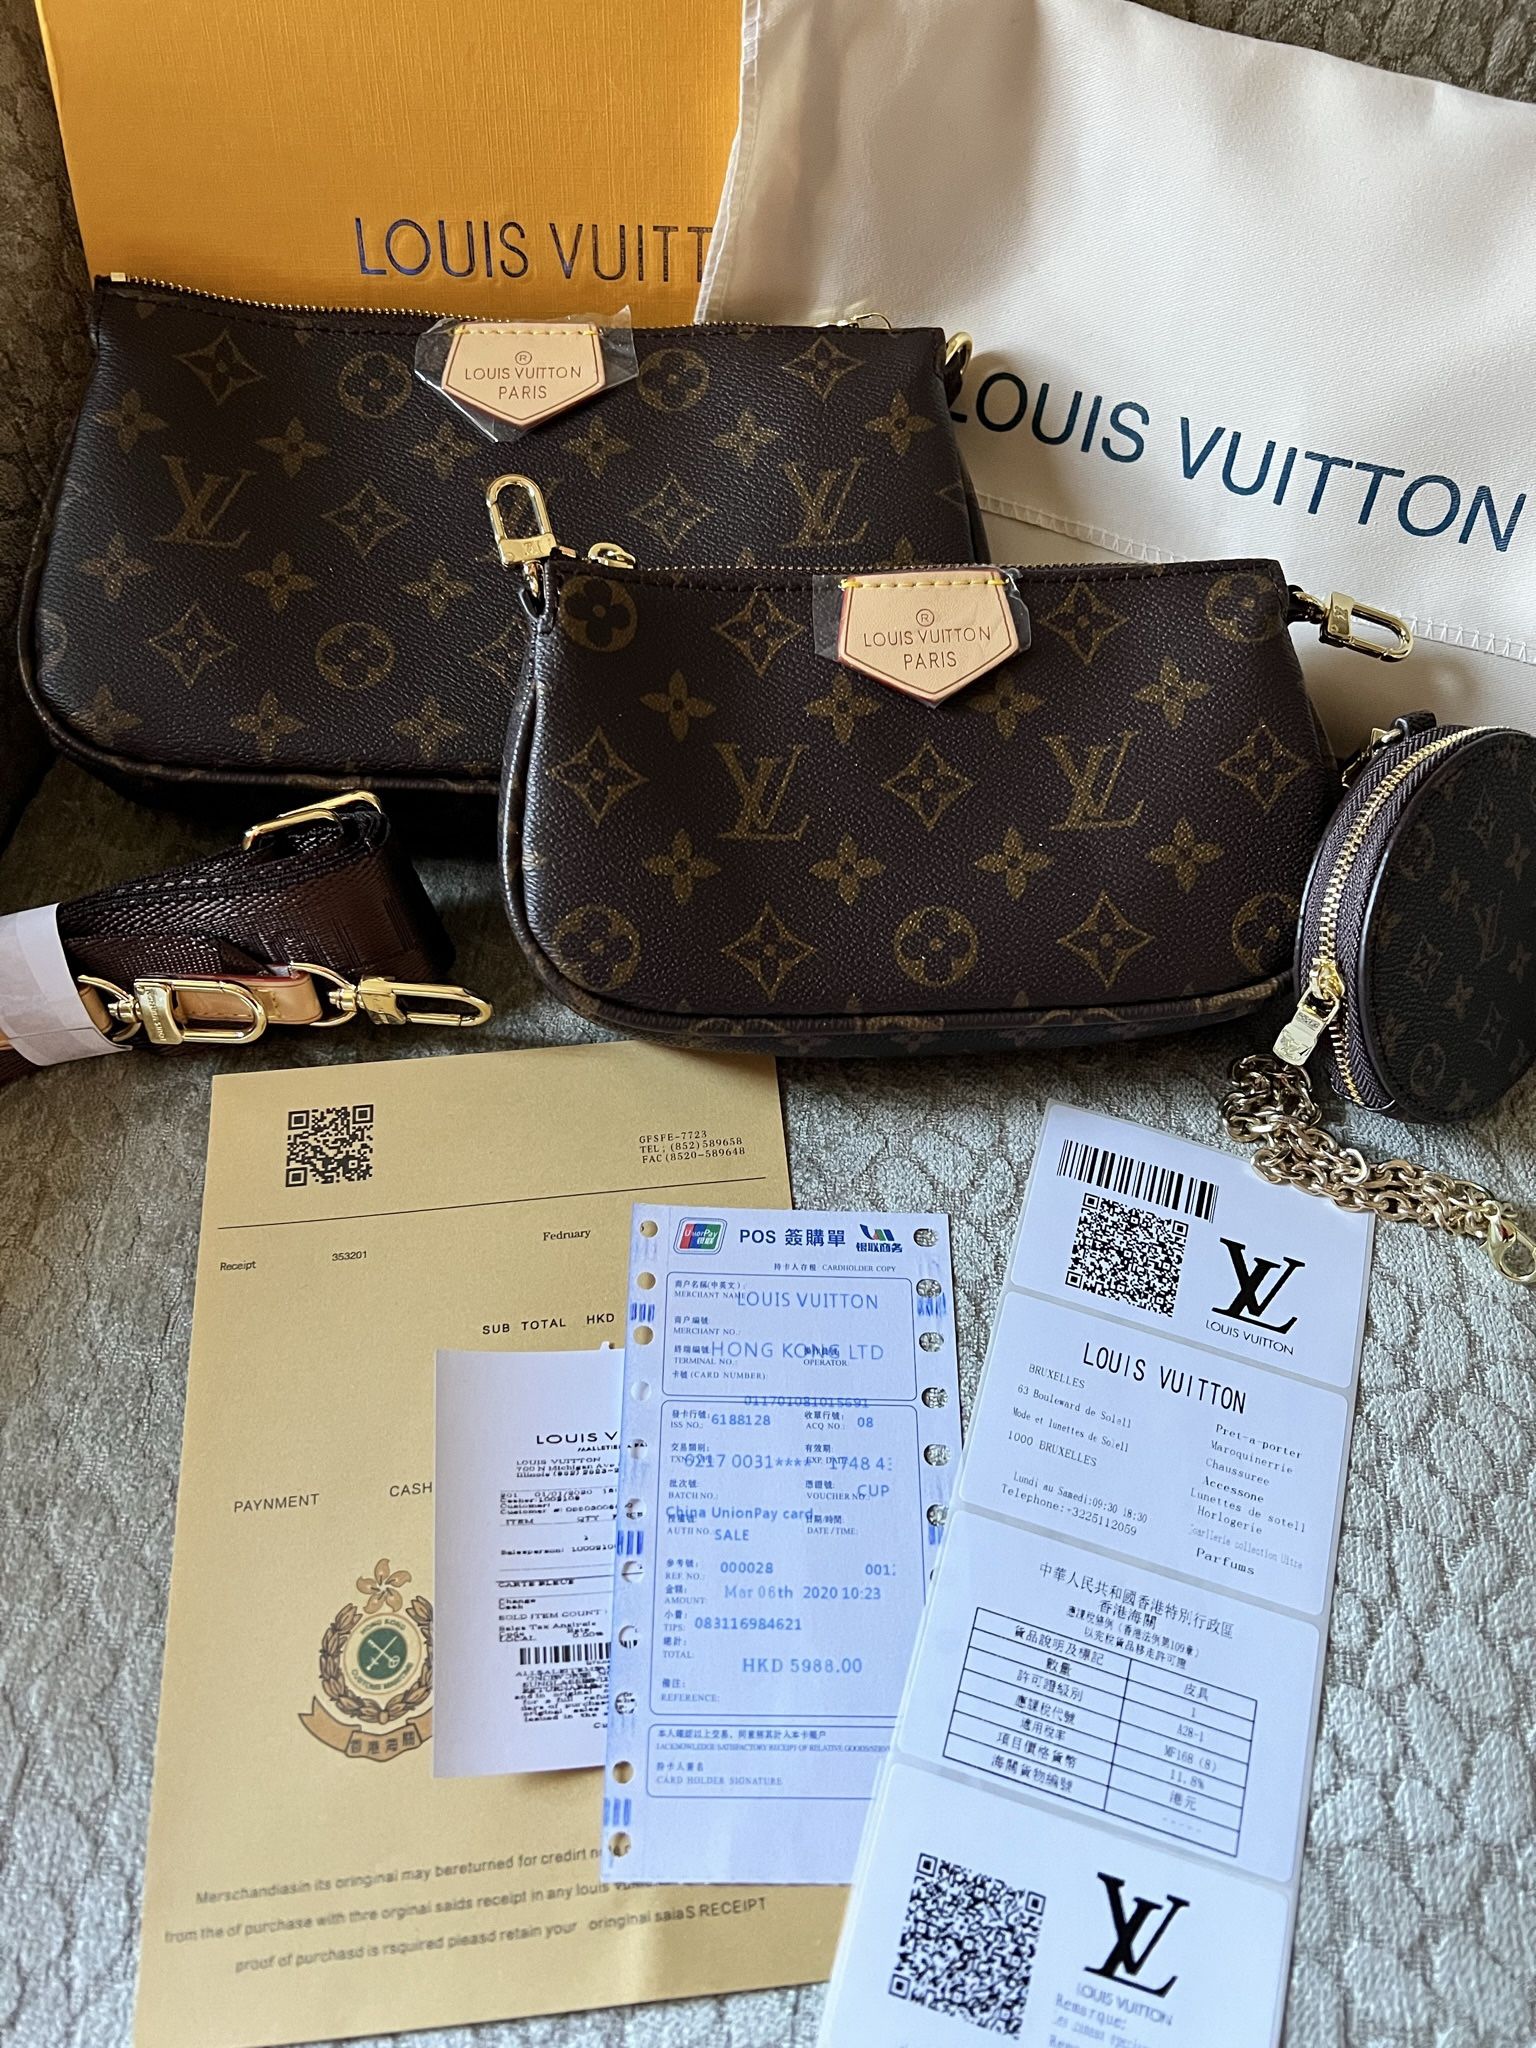 LV 3 Piece Purse/shoulder Bag With Matching Beanie for Sale in